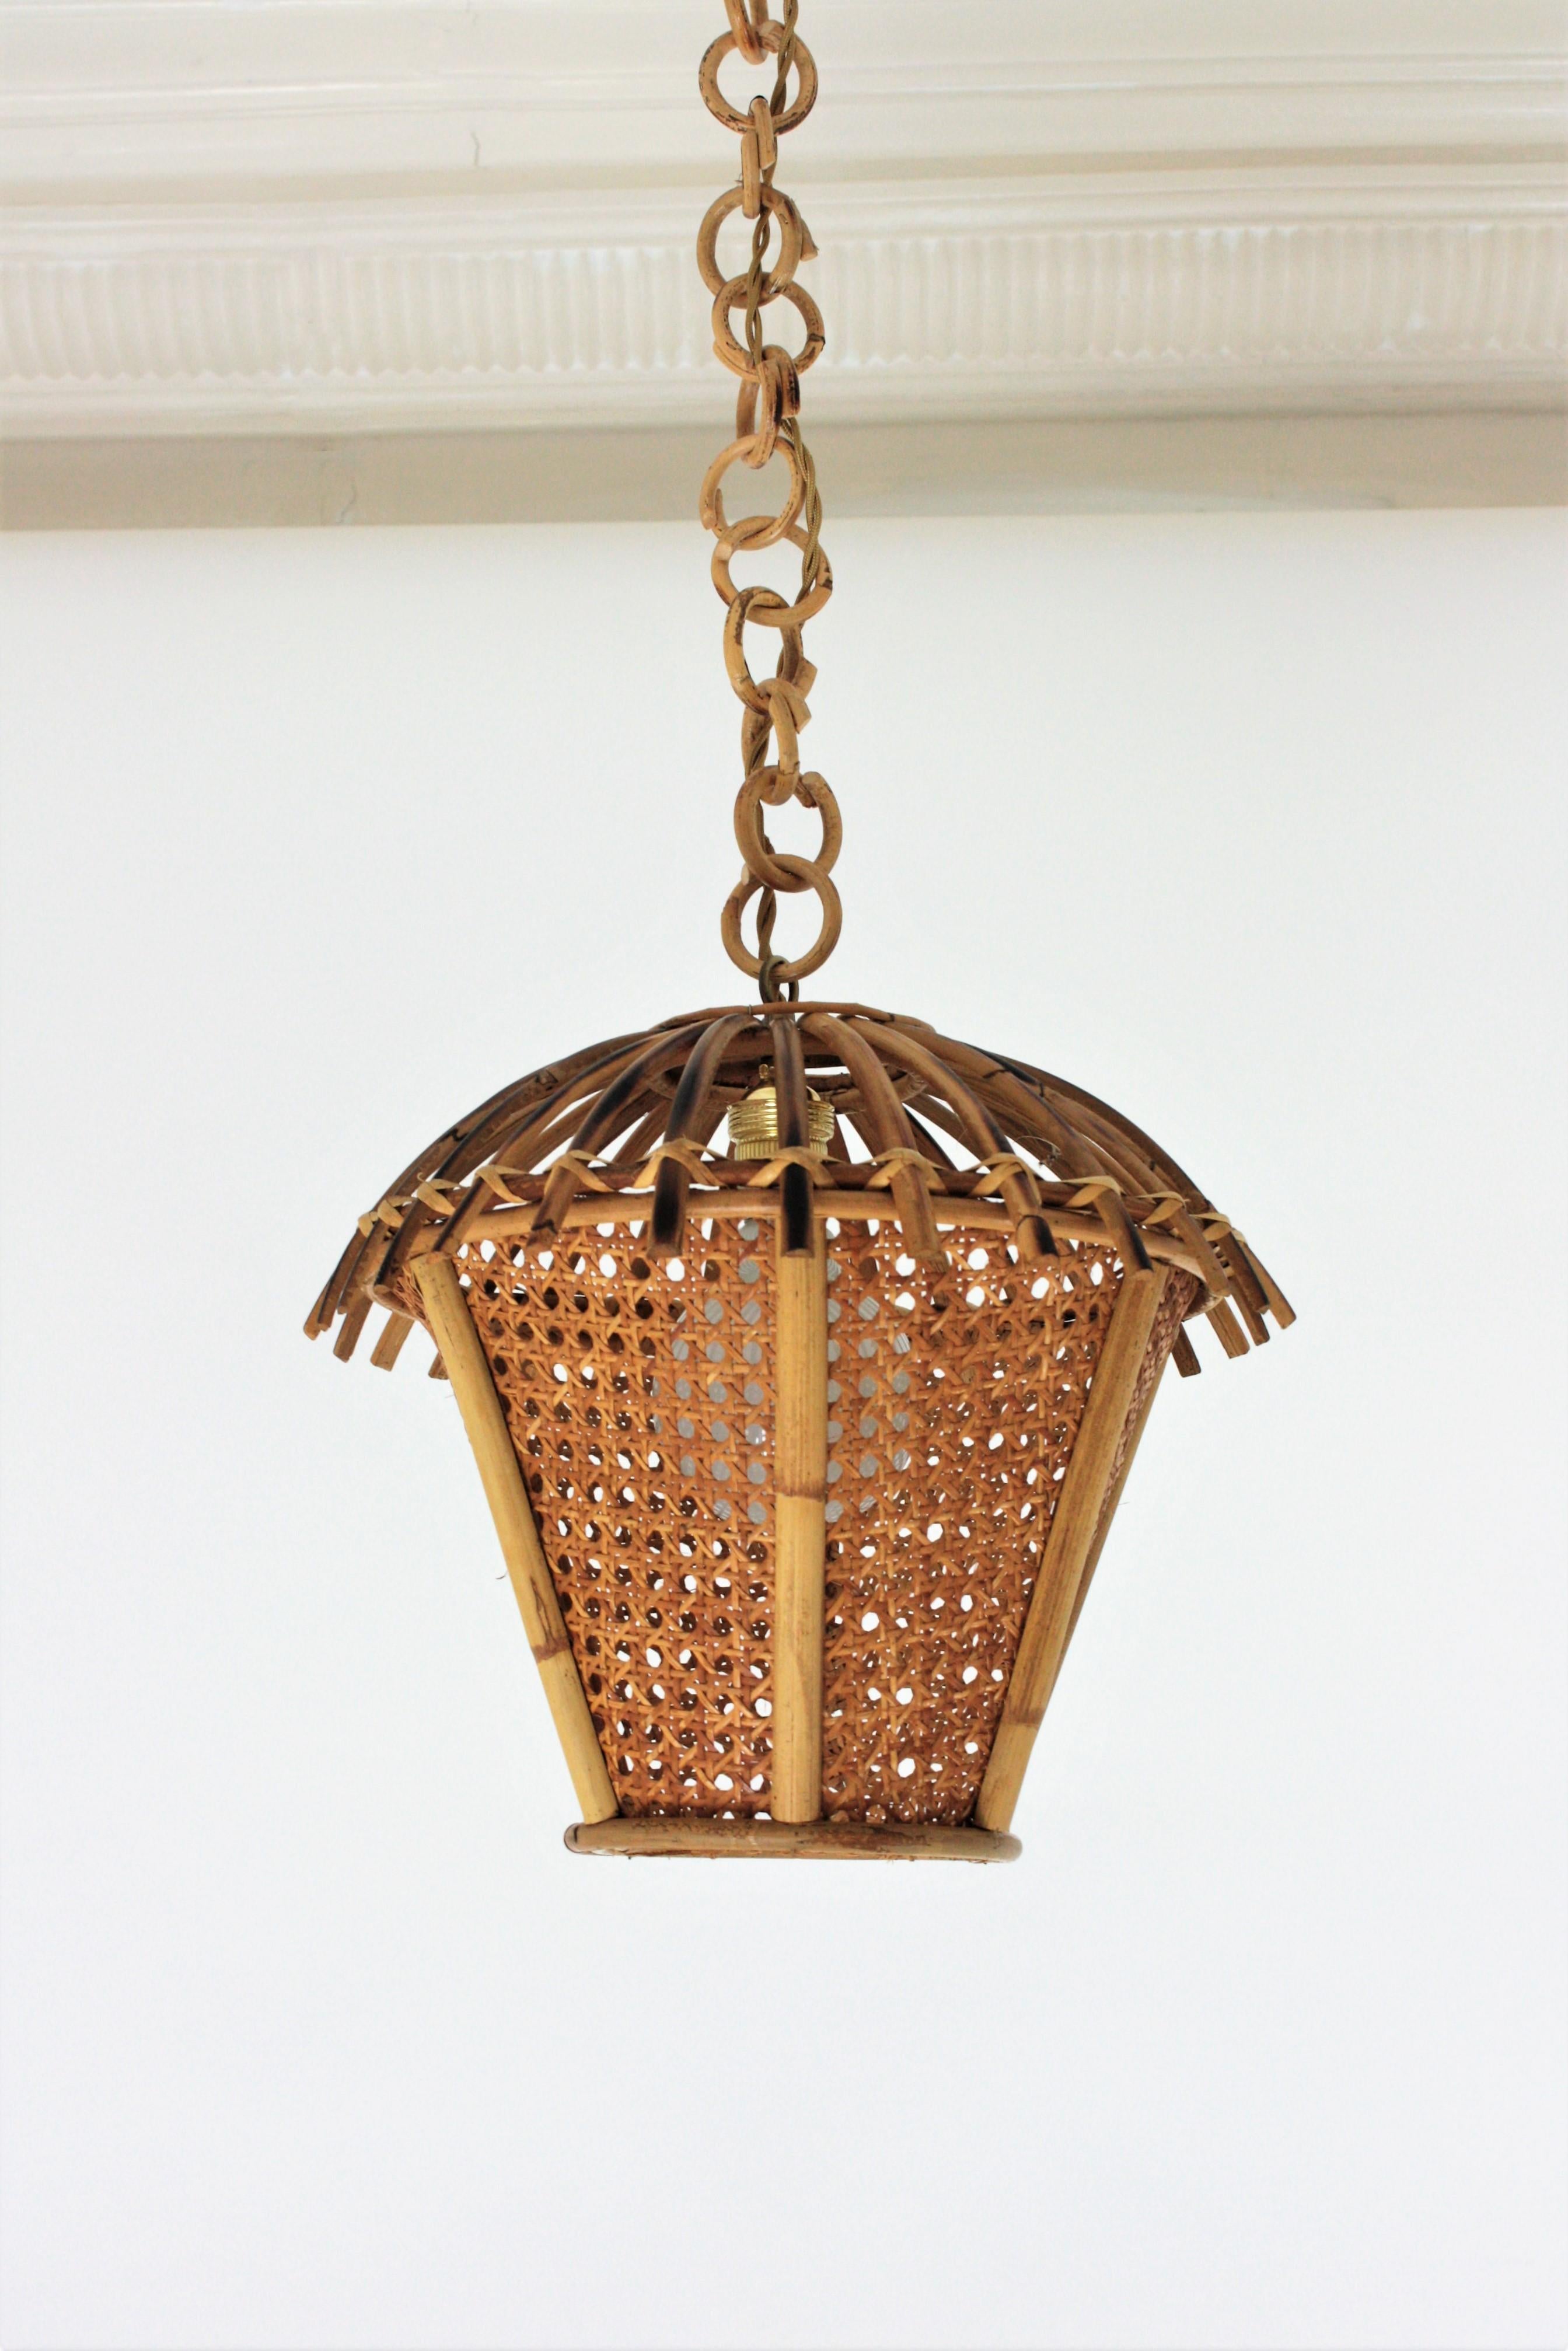 20th Century Italian Modernist Rattan and Wicker Wire Pagoda Pendant Hanging Light, 1960s For Sale